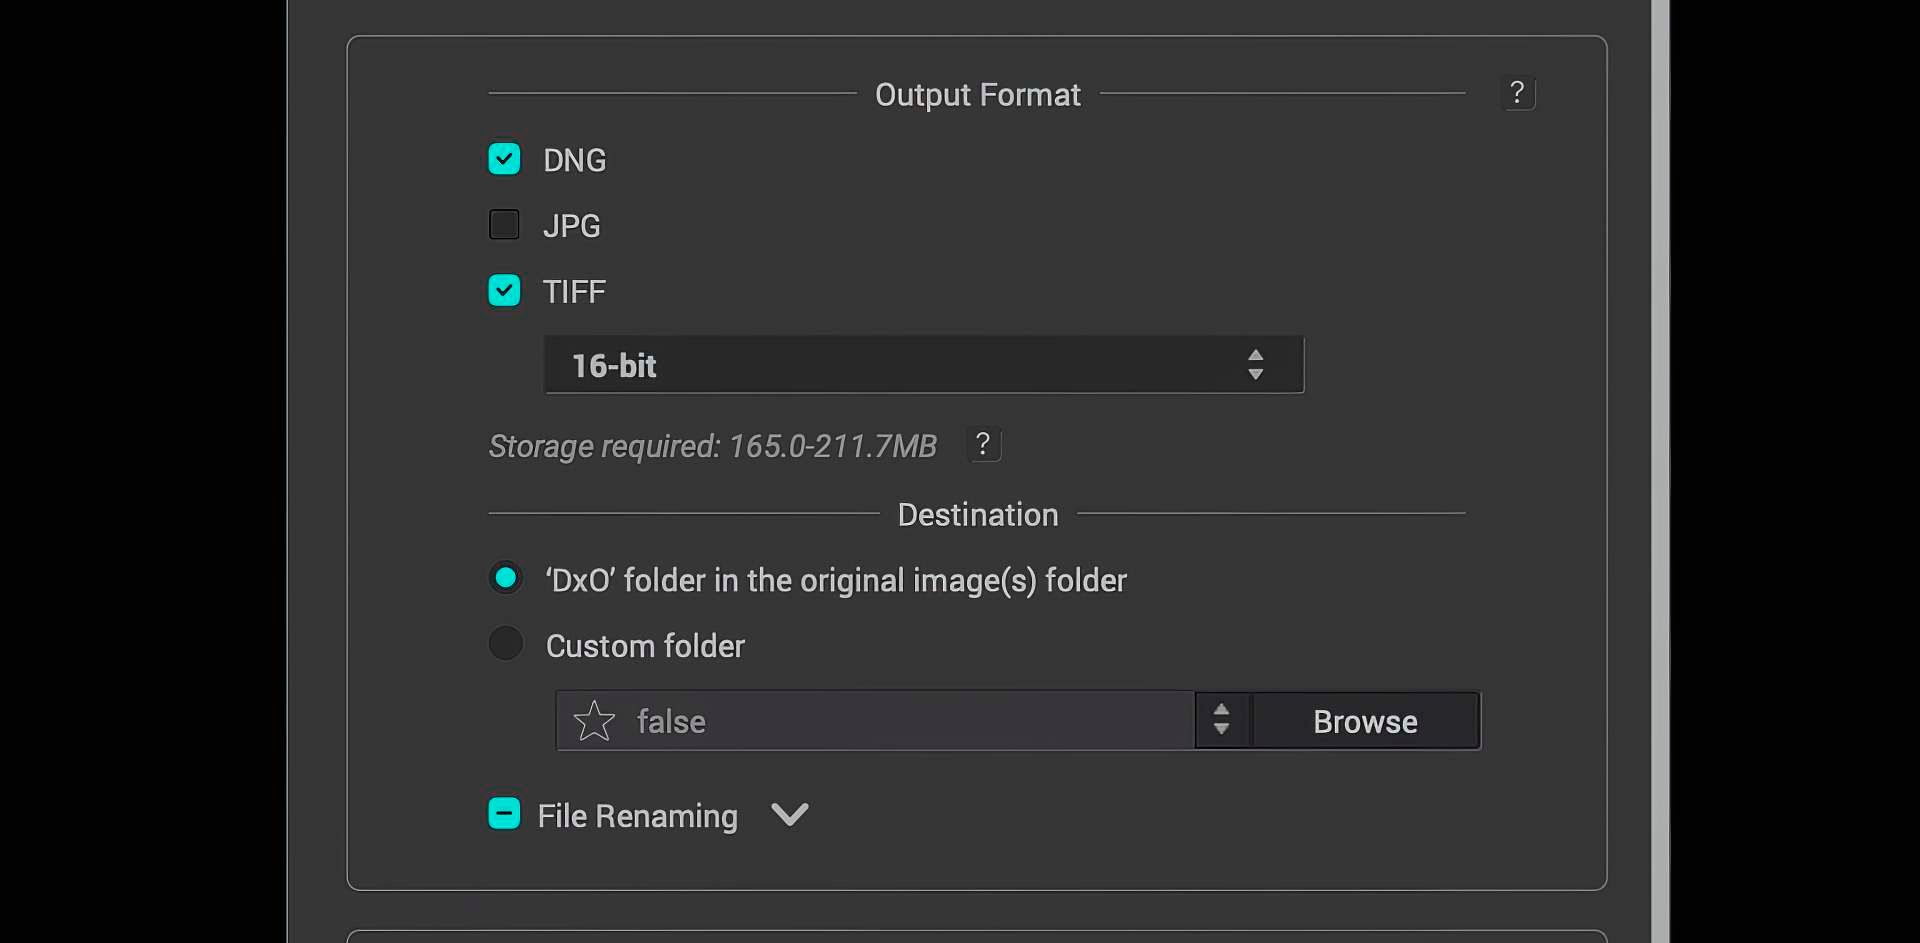 "Output format" options in PureRaw 3